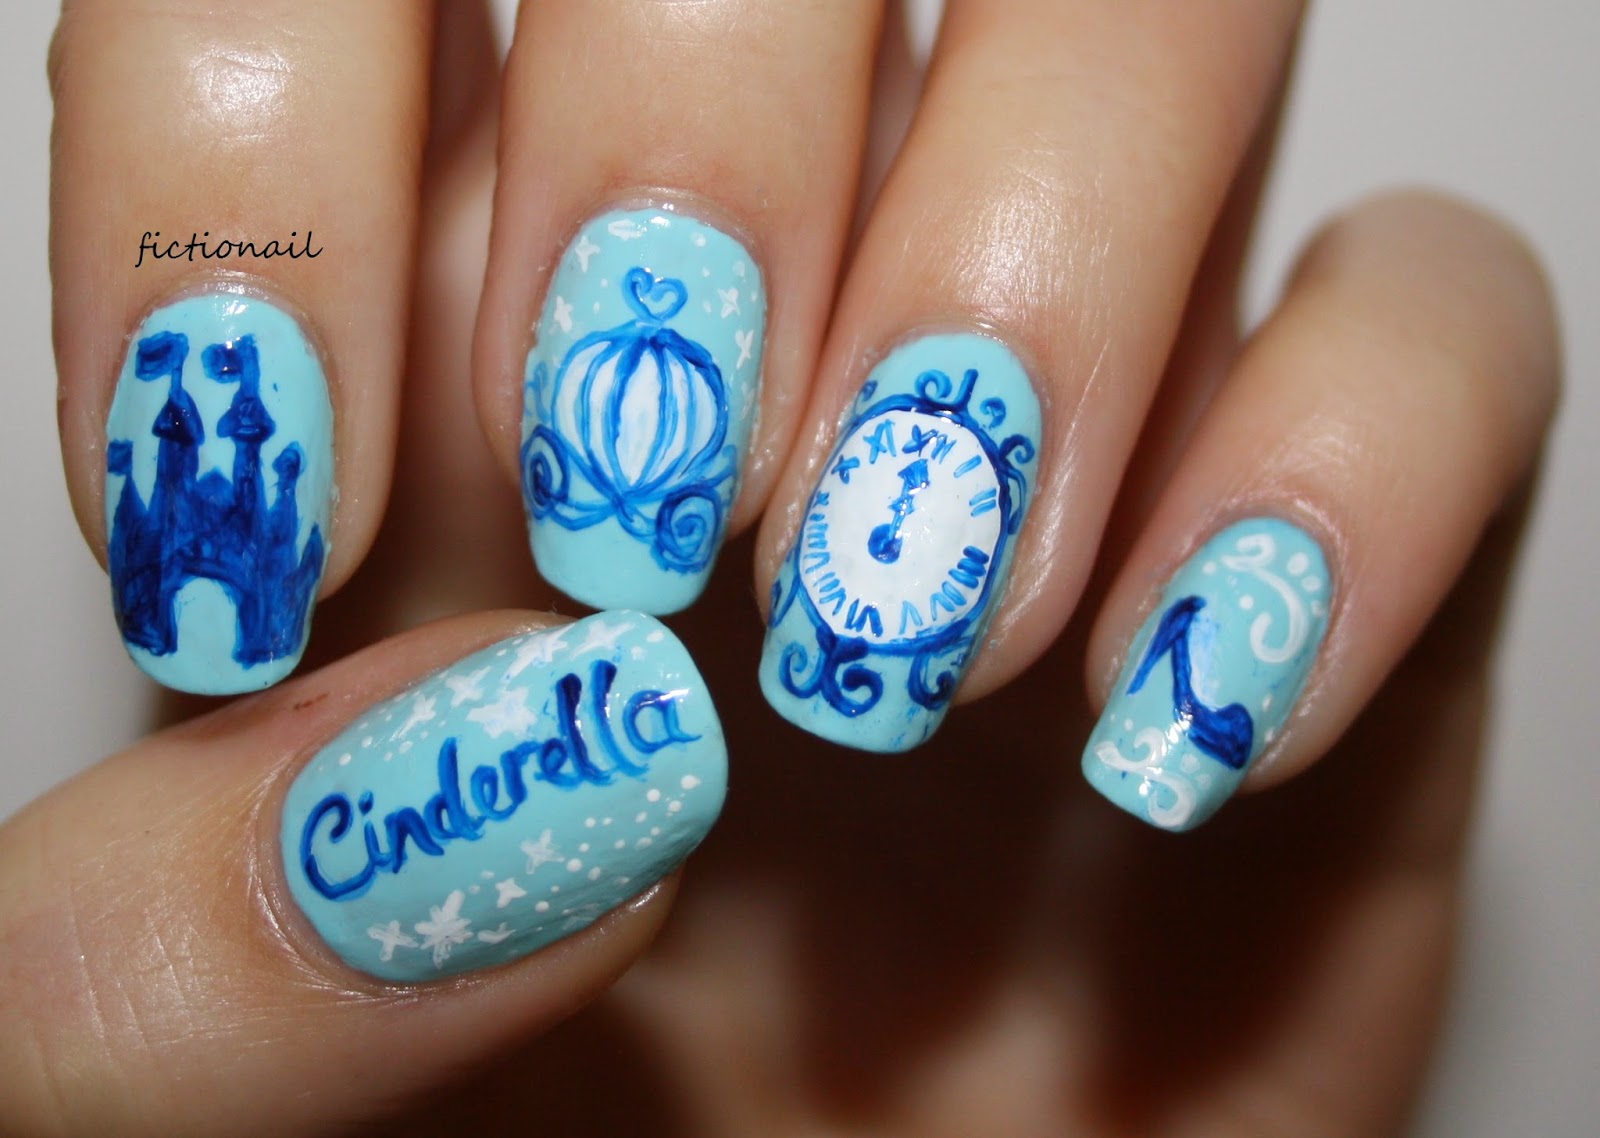 4. Amplaz Mall's top nail art designs inspired by Cinderella - wide 5